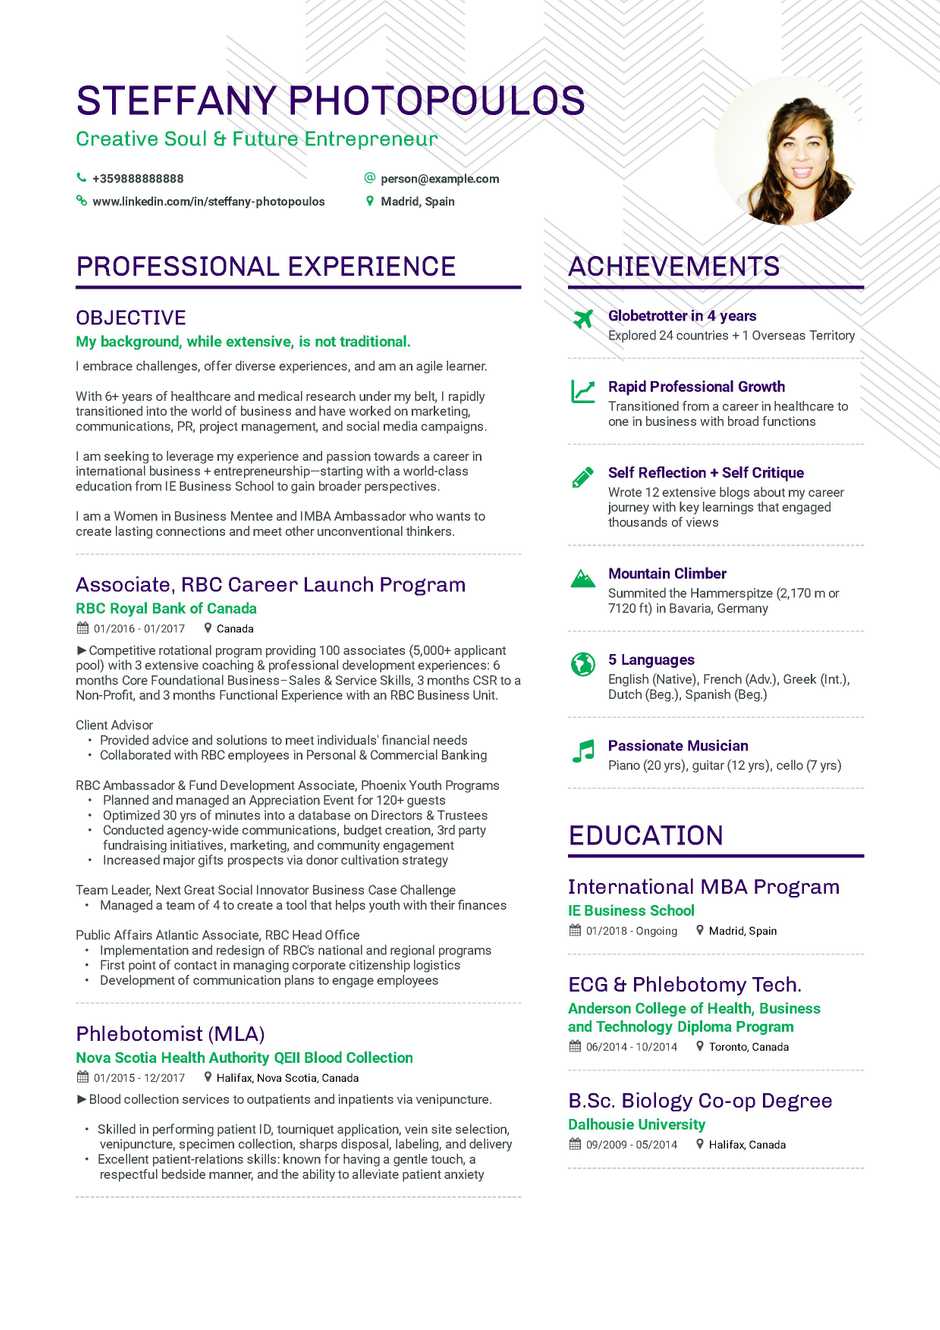 Professional Resume Examples Career Change Resume professional resume examples|wikiresume.com